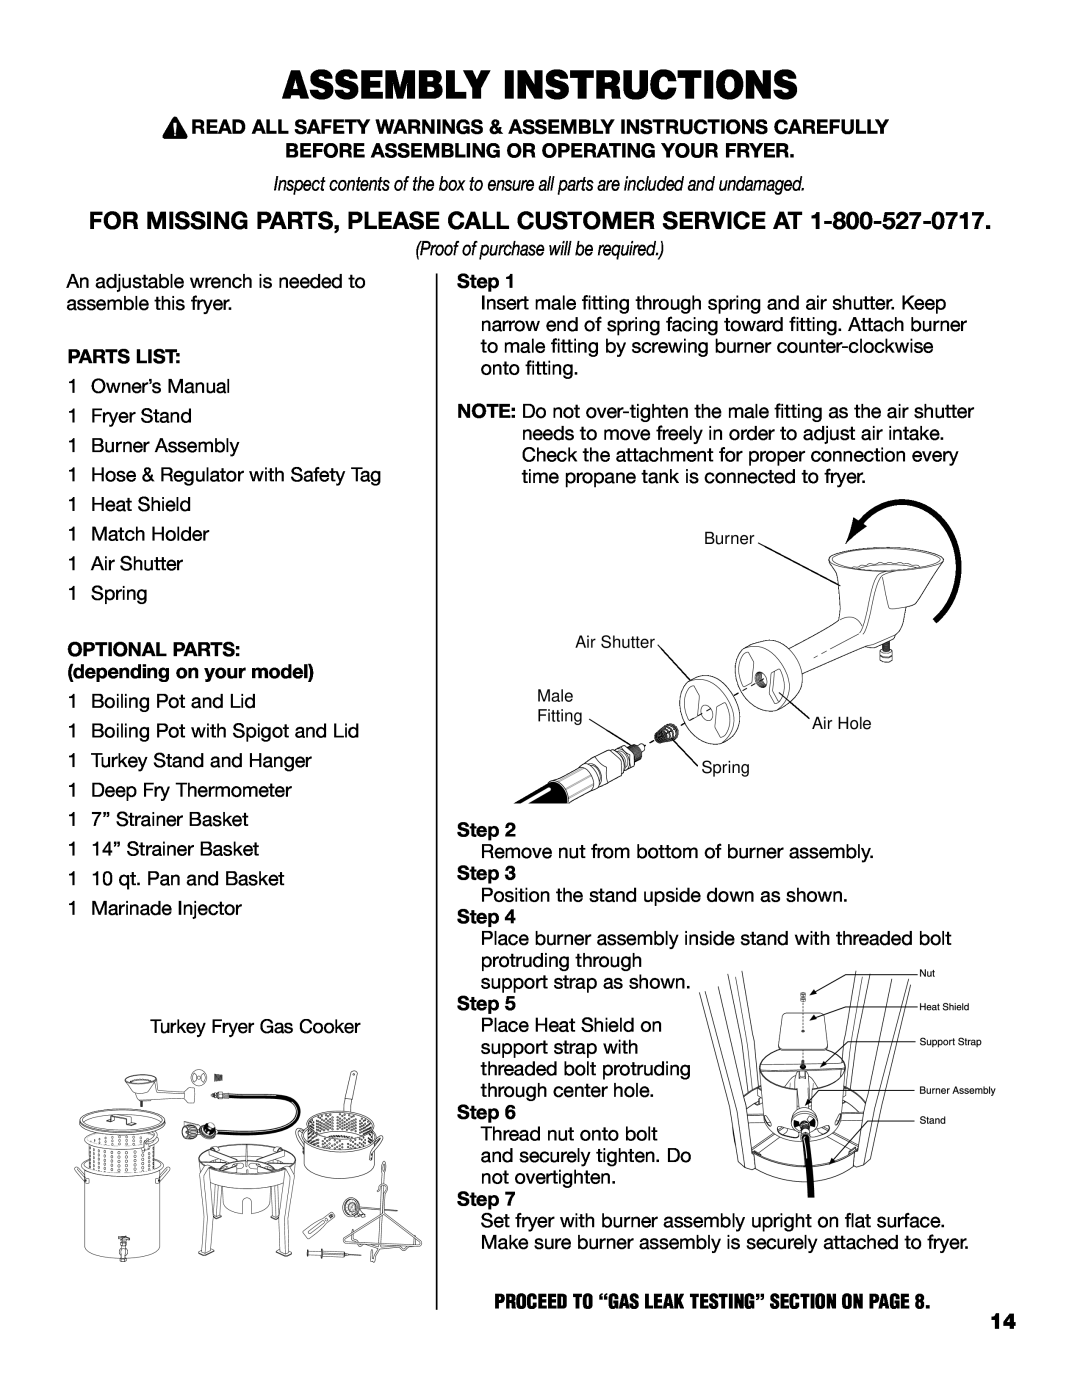 Brinkmann 816-3500 SERIES, 815-3500 owner manual Assembly Instructions, For Missing Parts, Please Call Customer Service At 